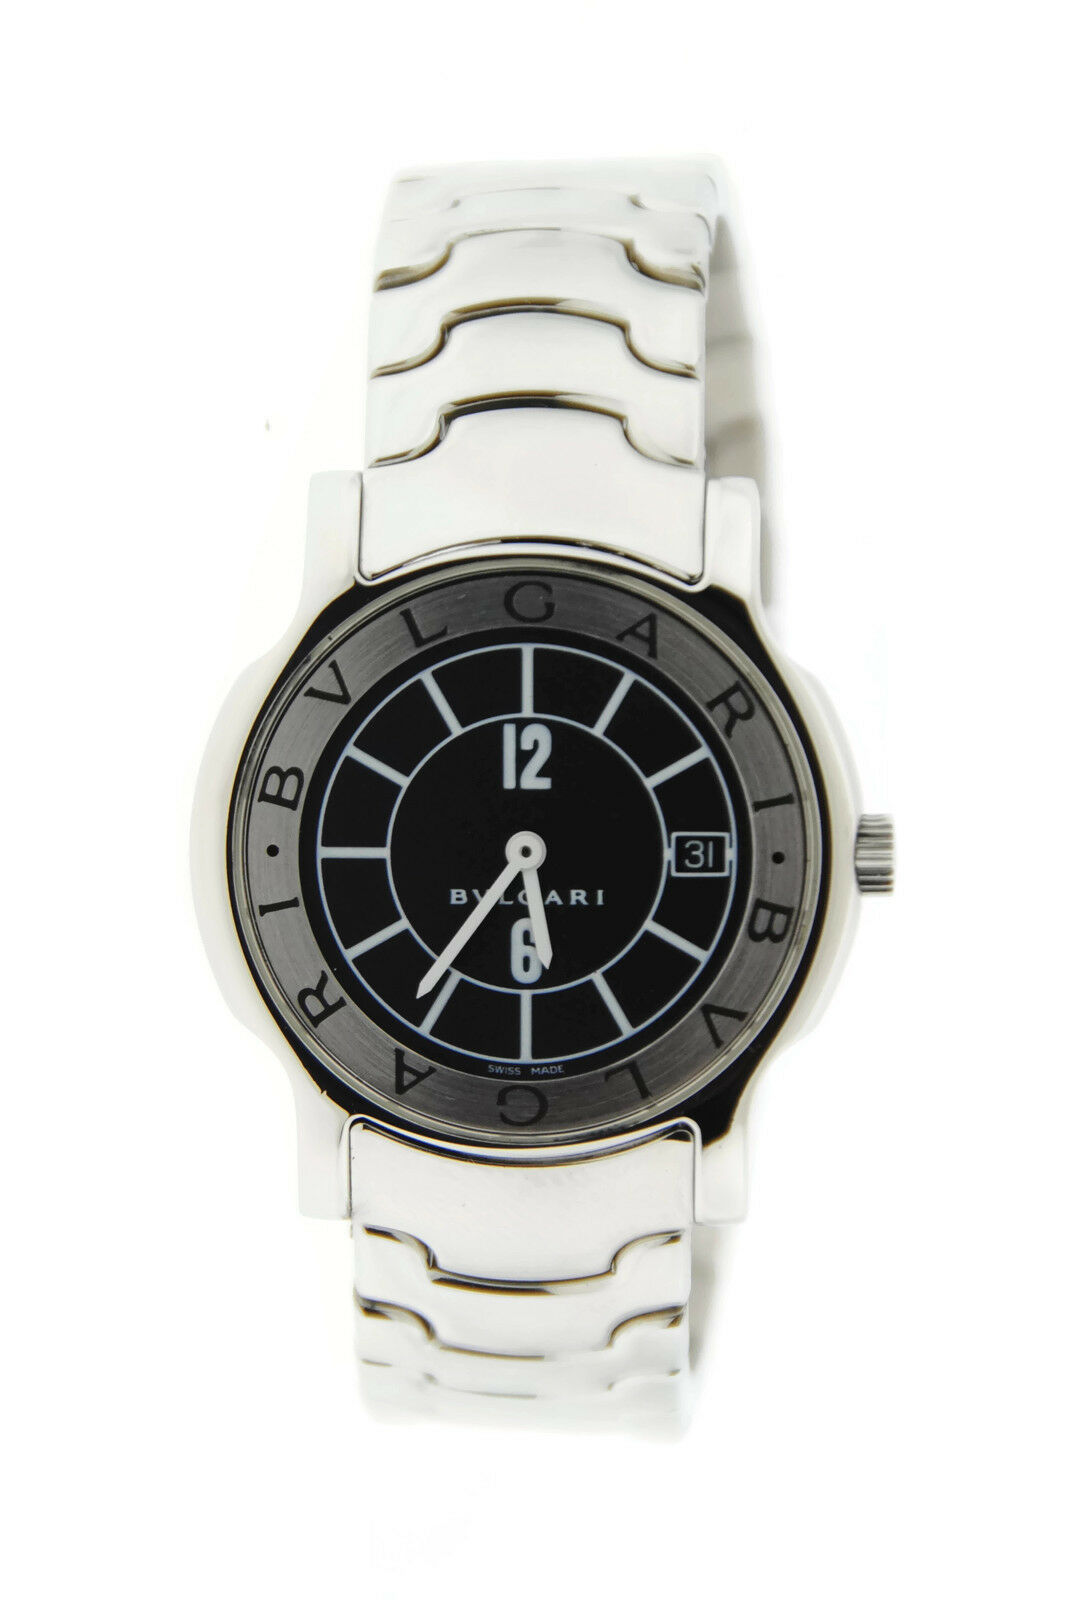 Bvlgari Solotempo Stainless Steel Watch 